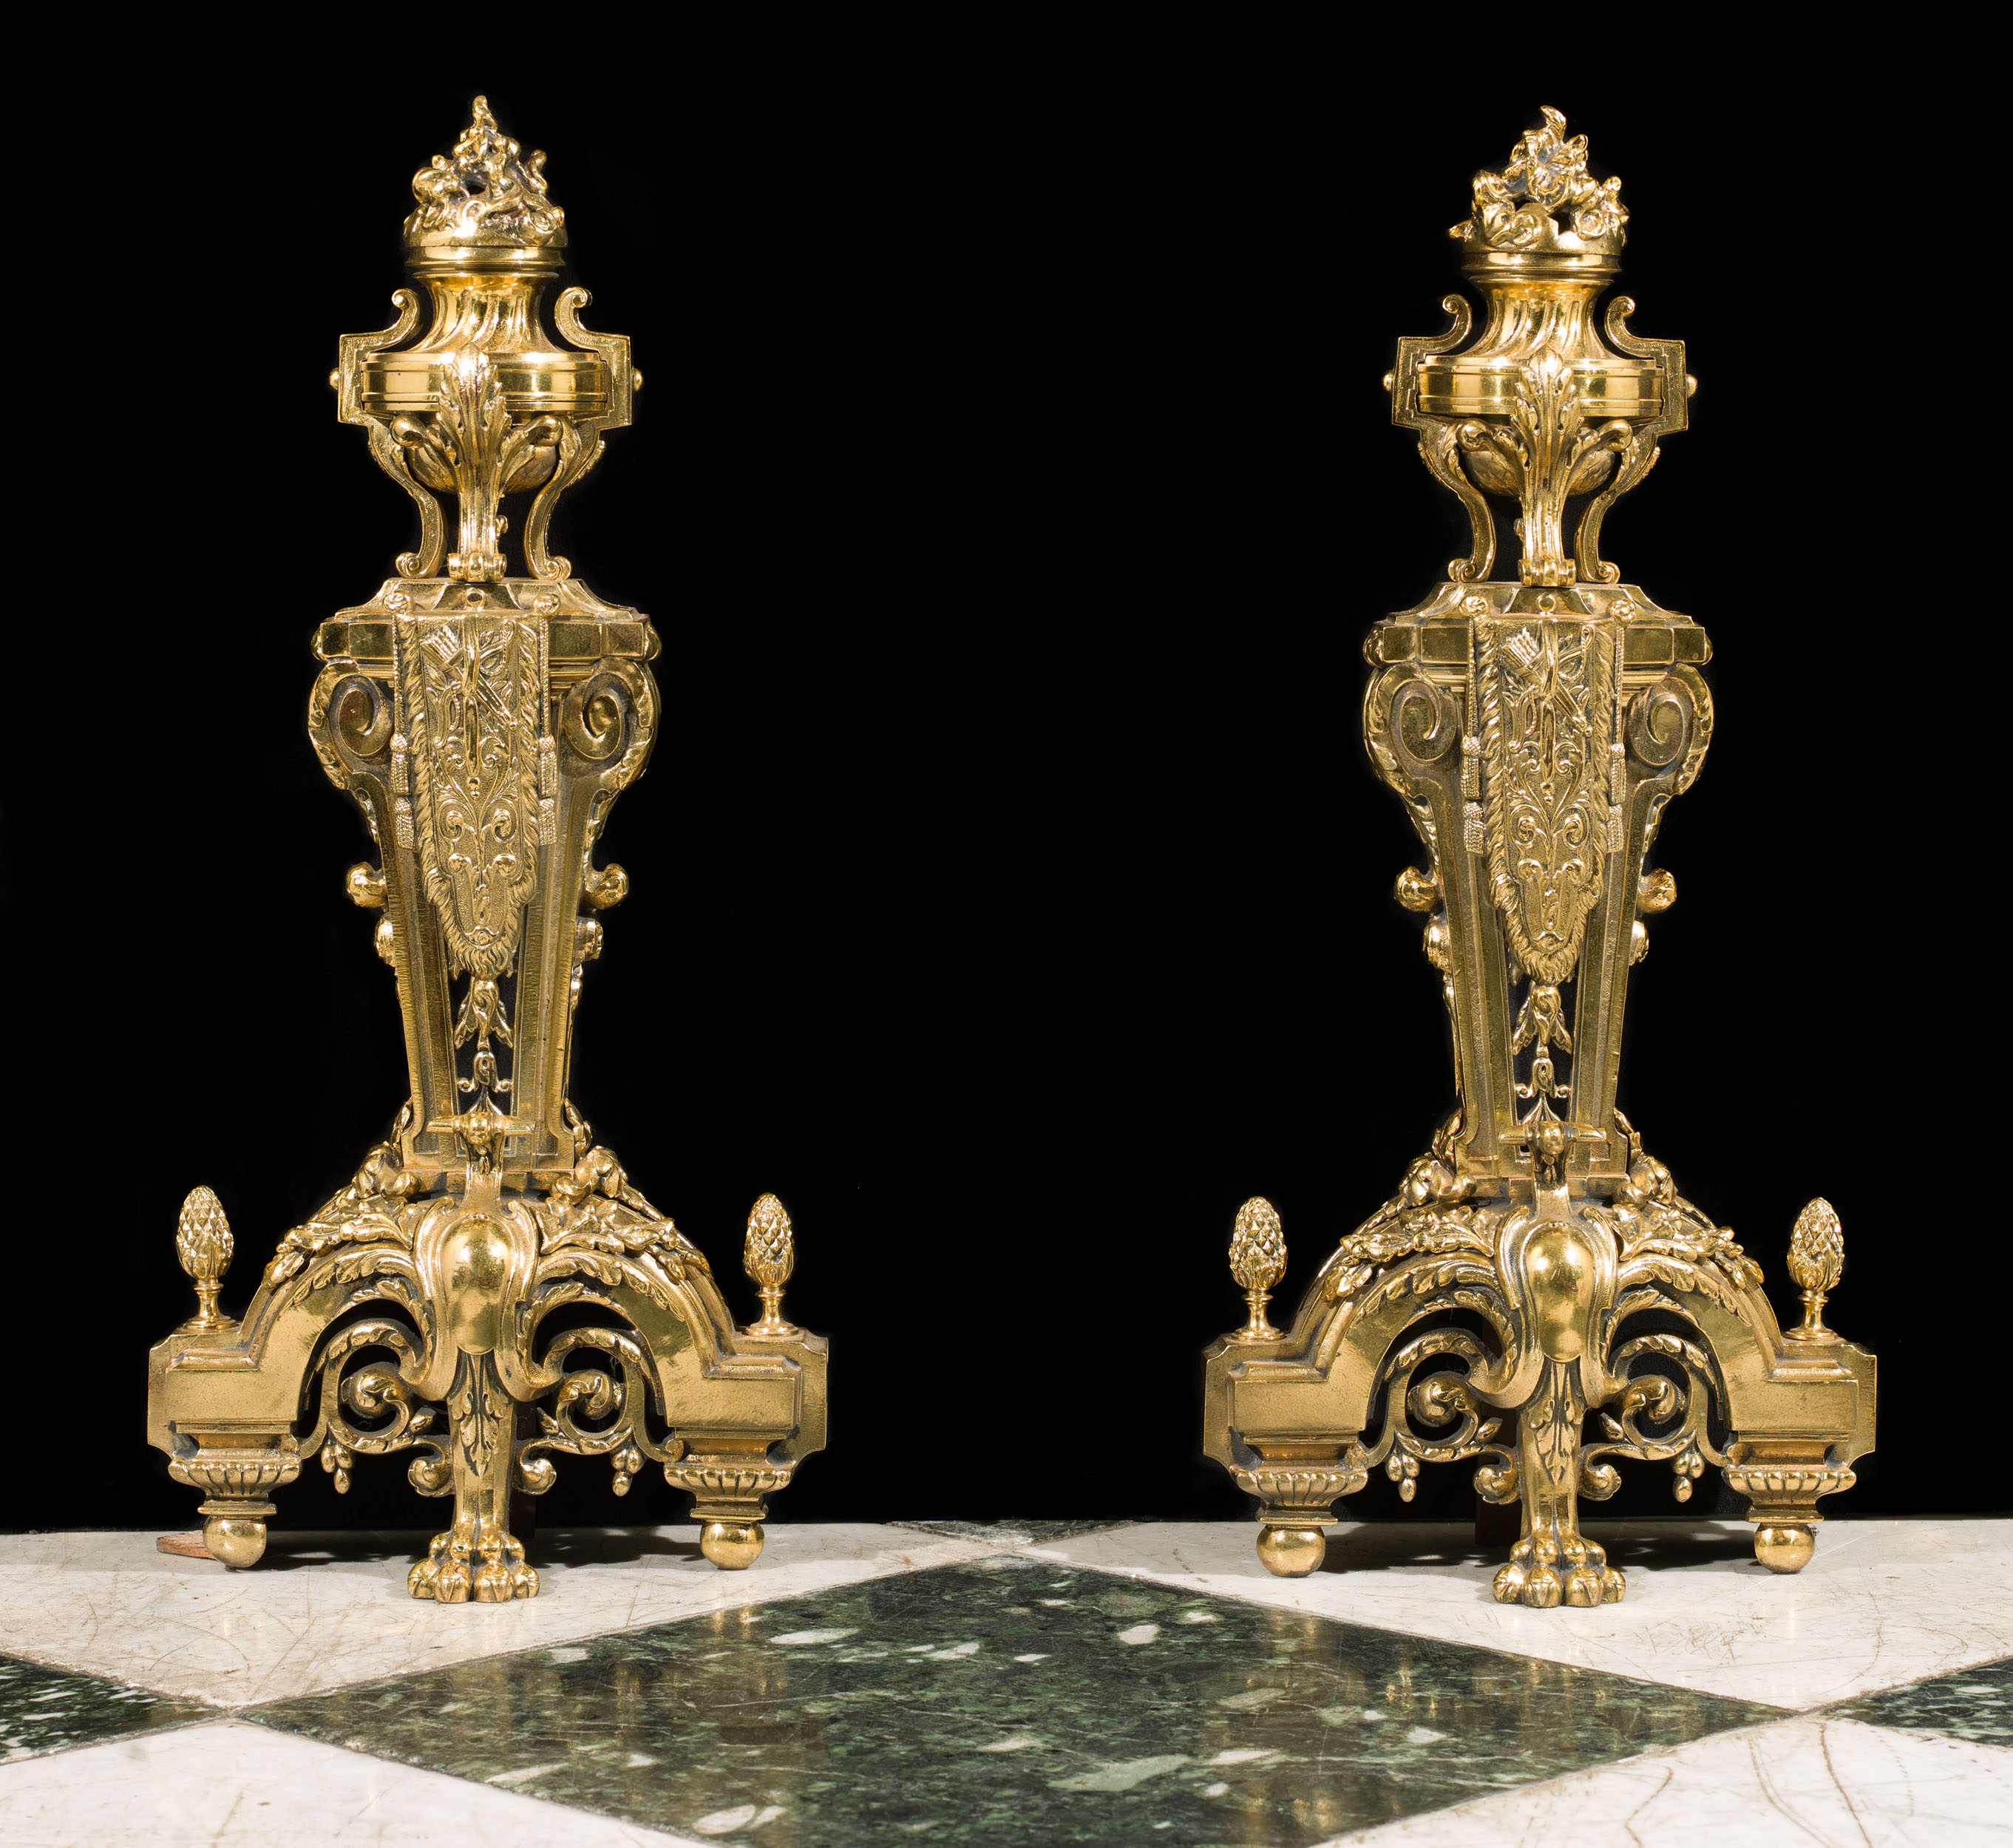  A pair of large brass Louis XVIstyle antique chenets.  